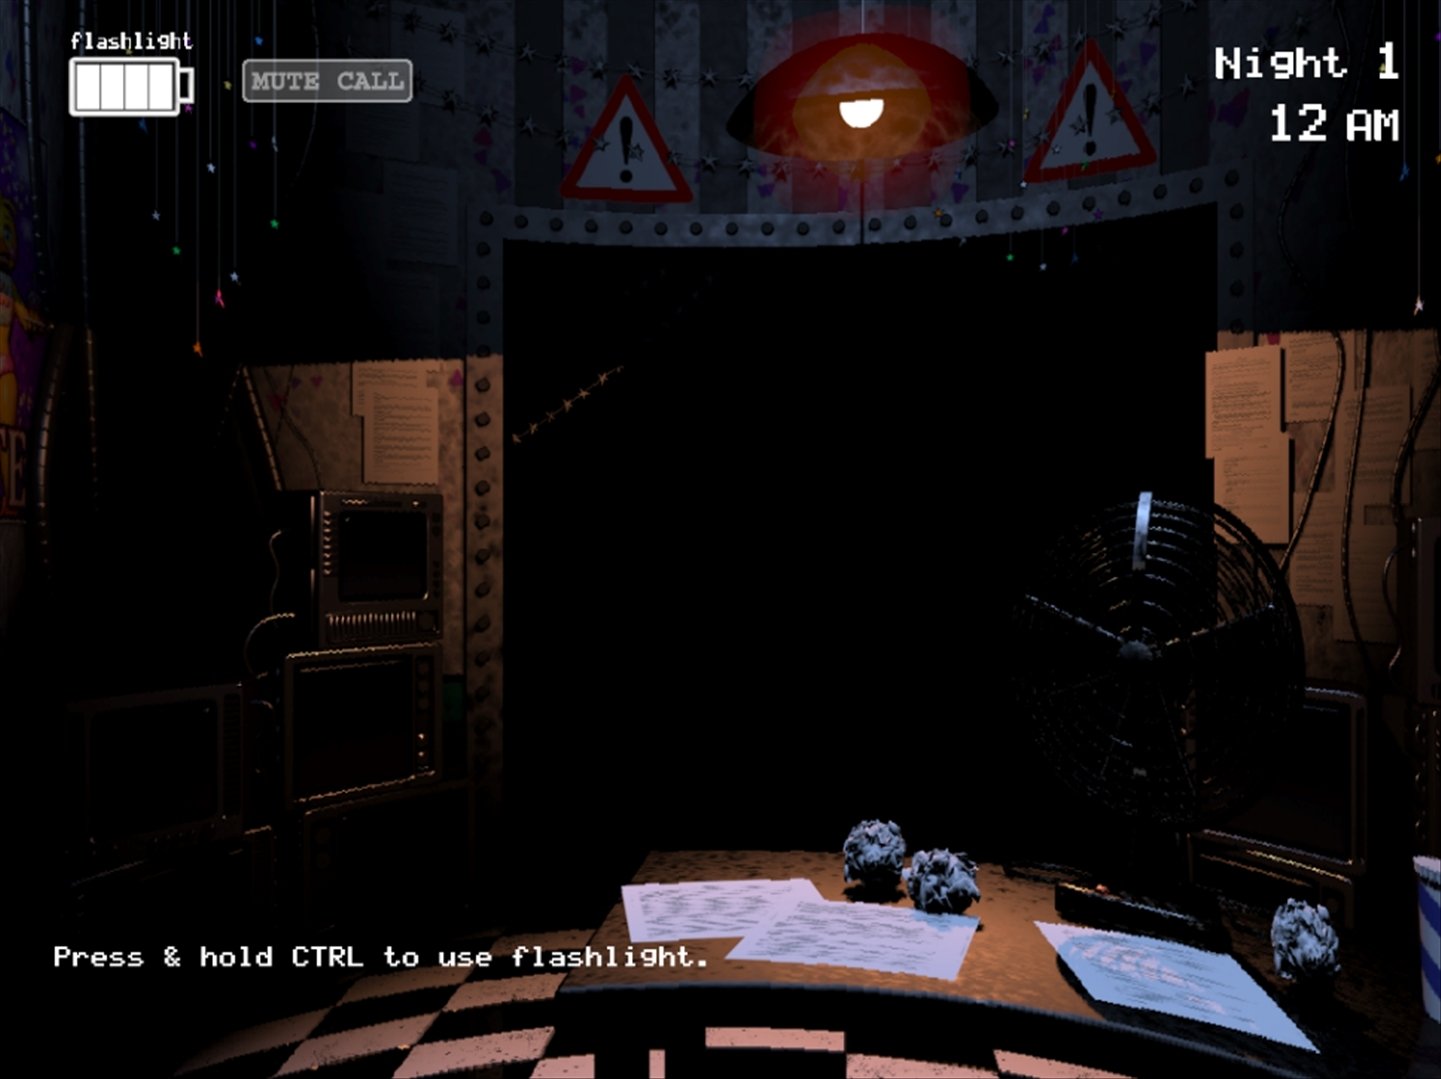 Five Nights at Freddy's 2 - Download for PC Free